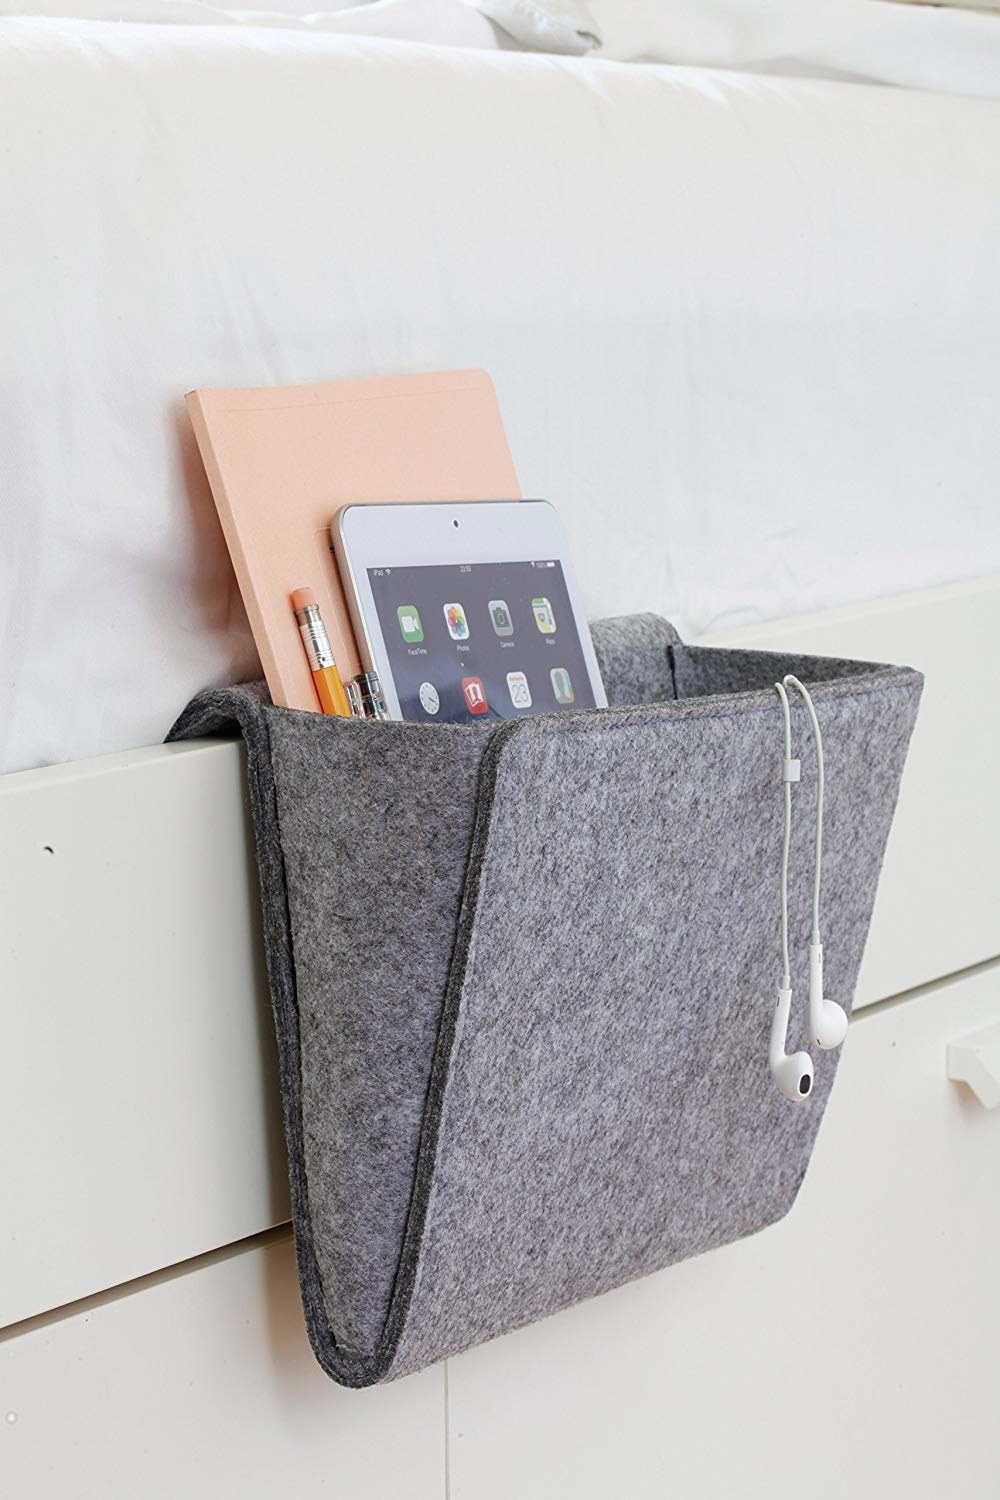 Felt bedside caddy containing headphones, tablet, and notebook